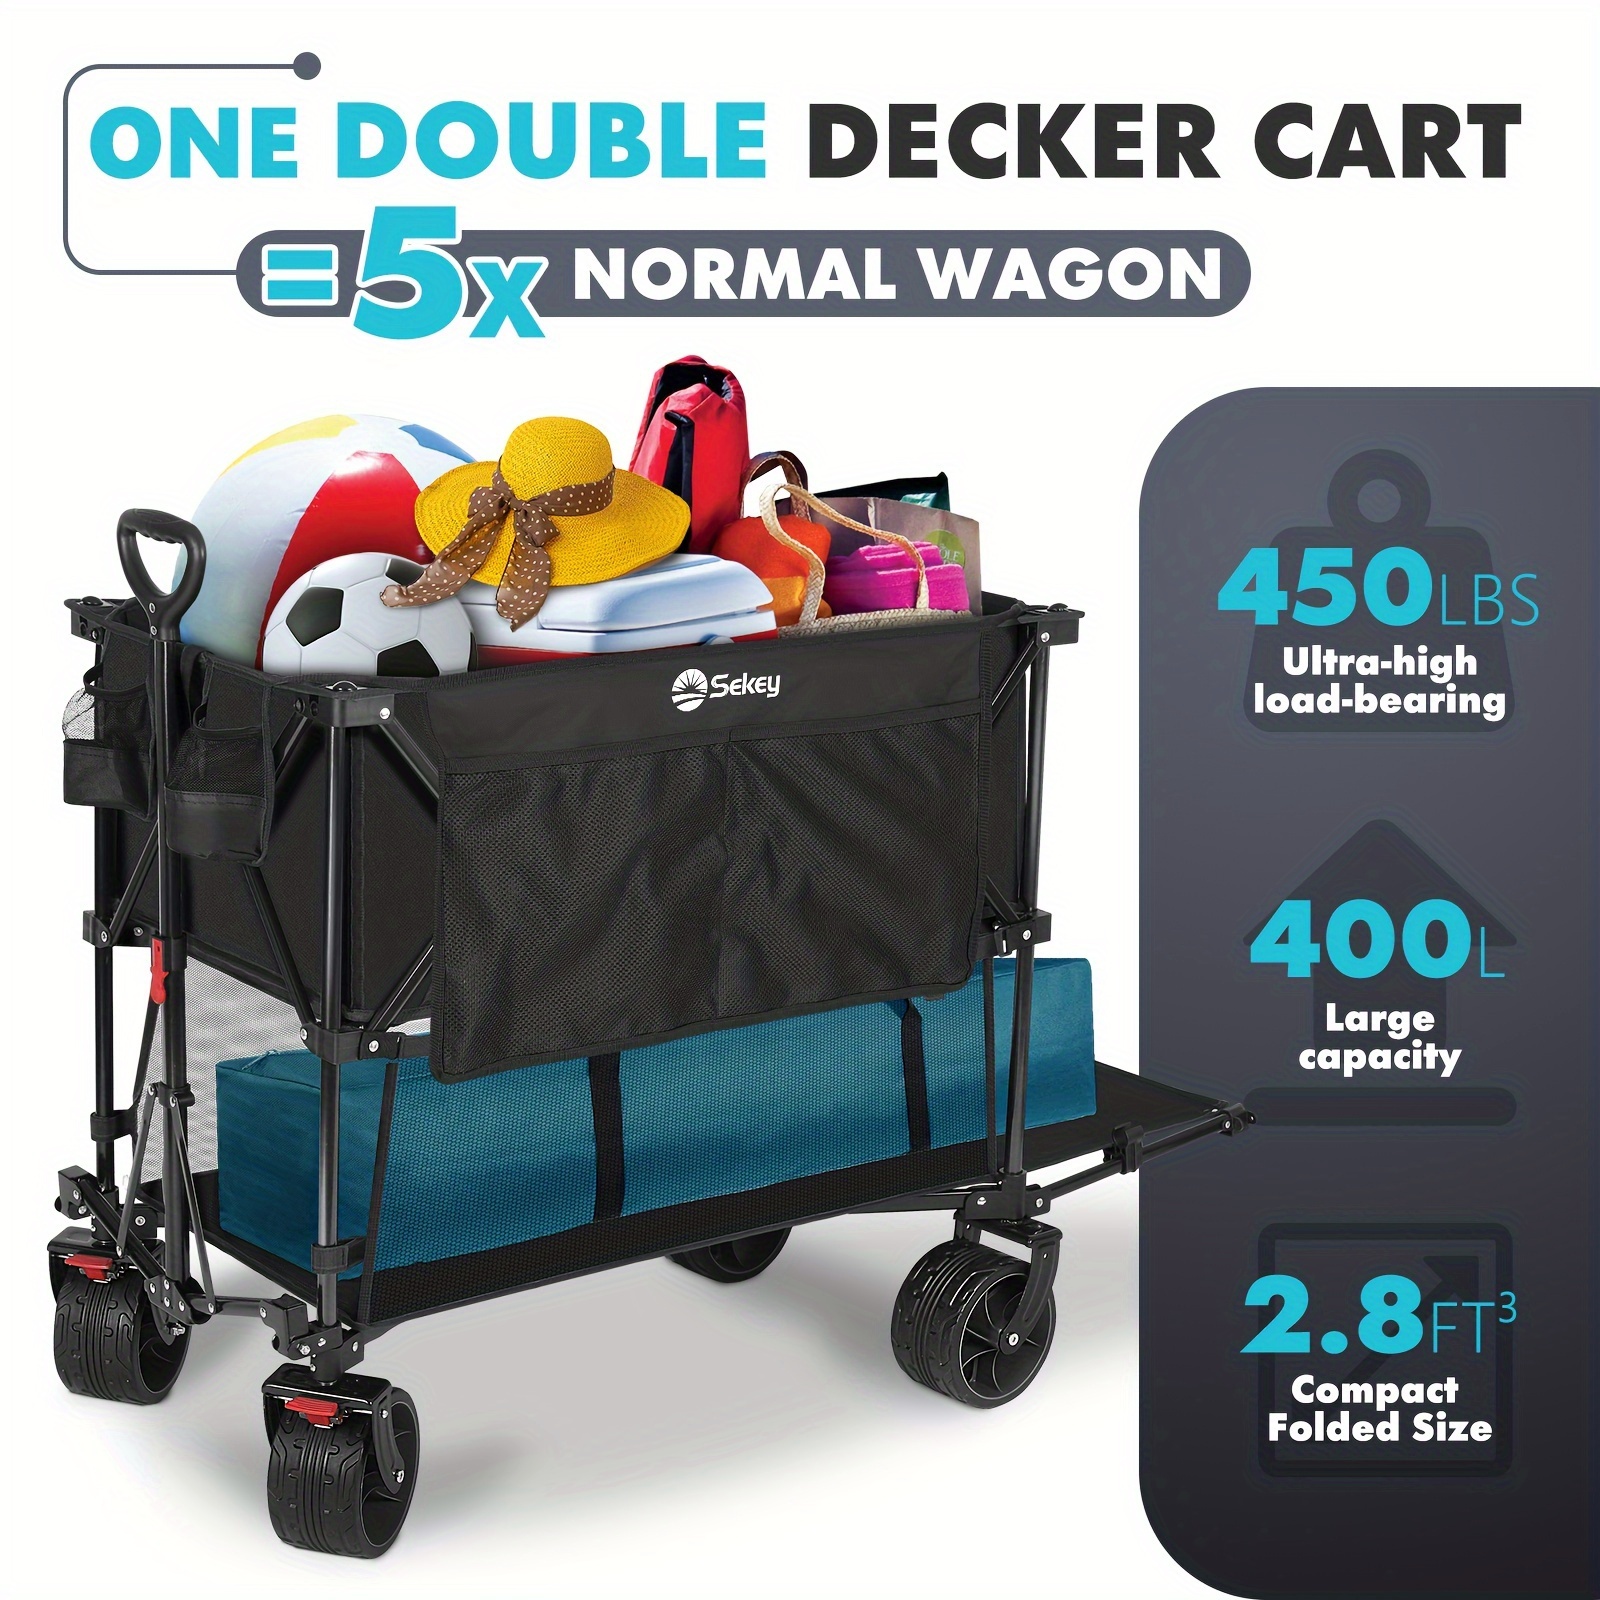 

Sekey 400l Large Capacity Folding Wagon, 54" Extra Long Extender Wagon Cart, 450lbs Heavy Duty Collapsible Wagon, All-terrain Big Wheels For Camping, Sports, Shopping